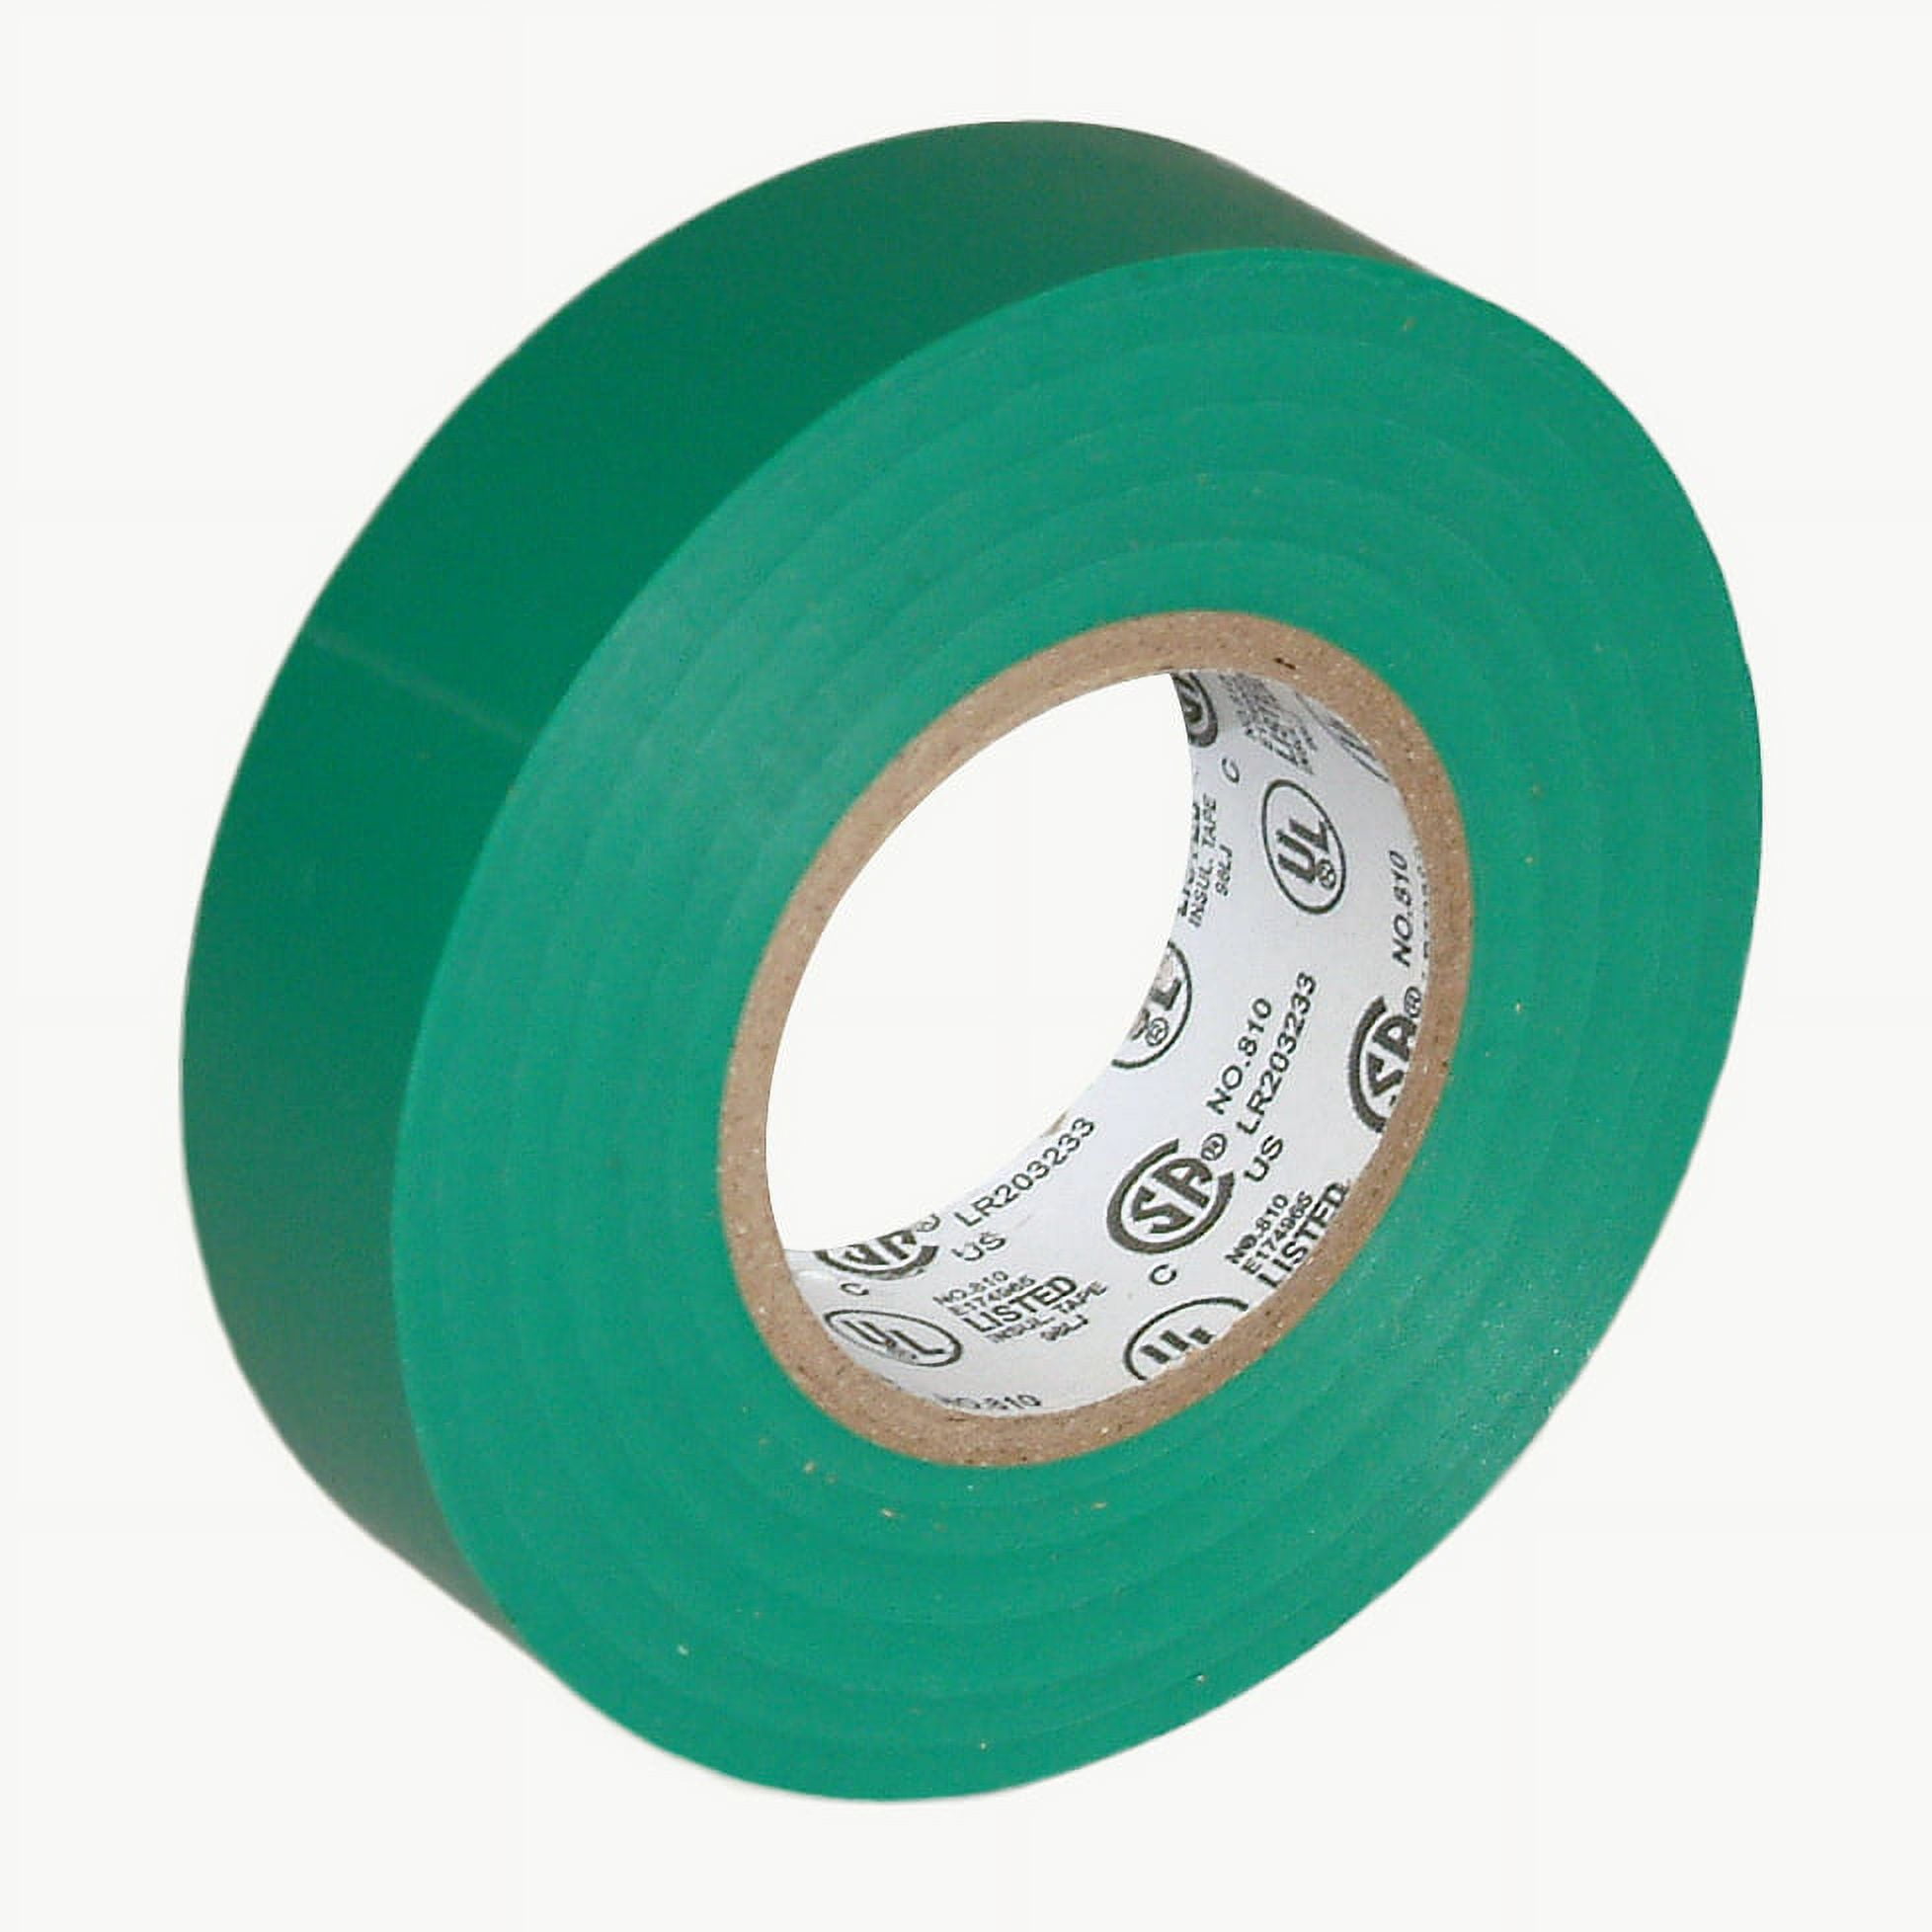 JVCC E-Tape Colored Electrical Tape [7 mils thick]: 3/4 in. x 66 ft.  (Green) 